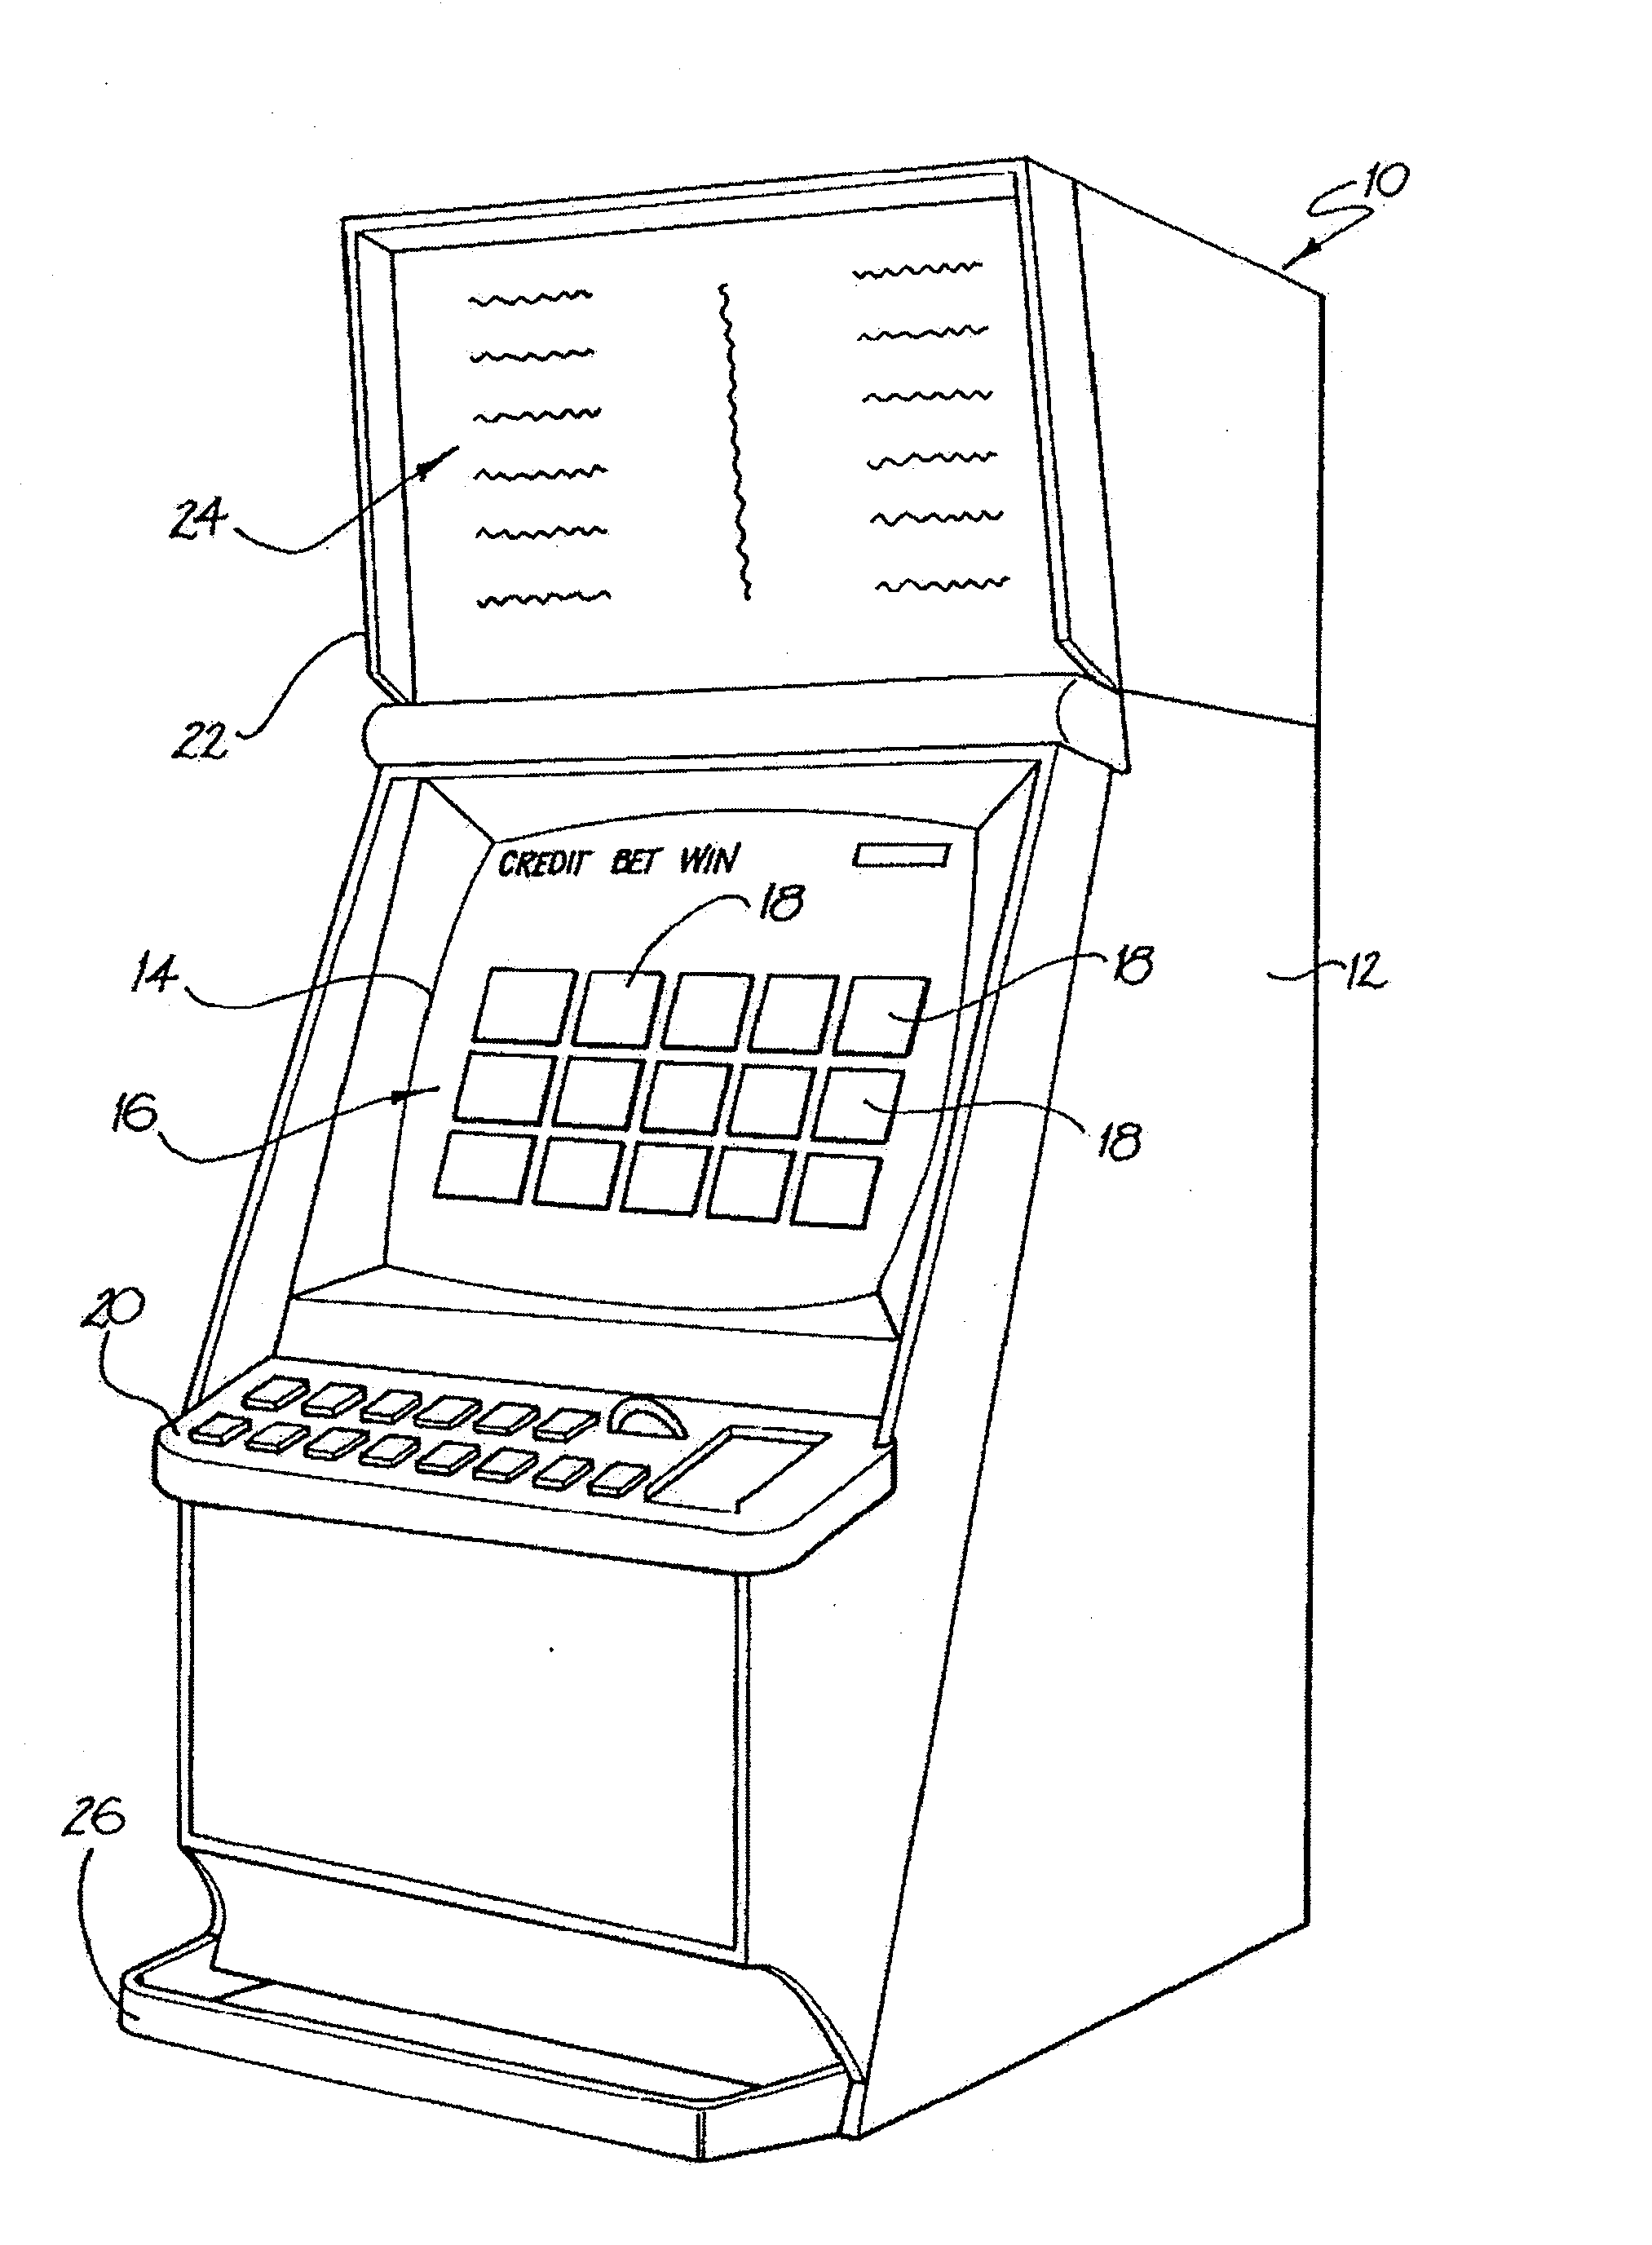 Gaming machine with improved display